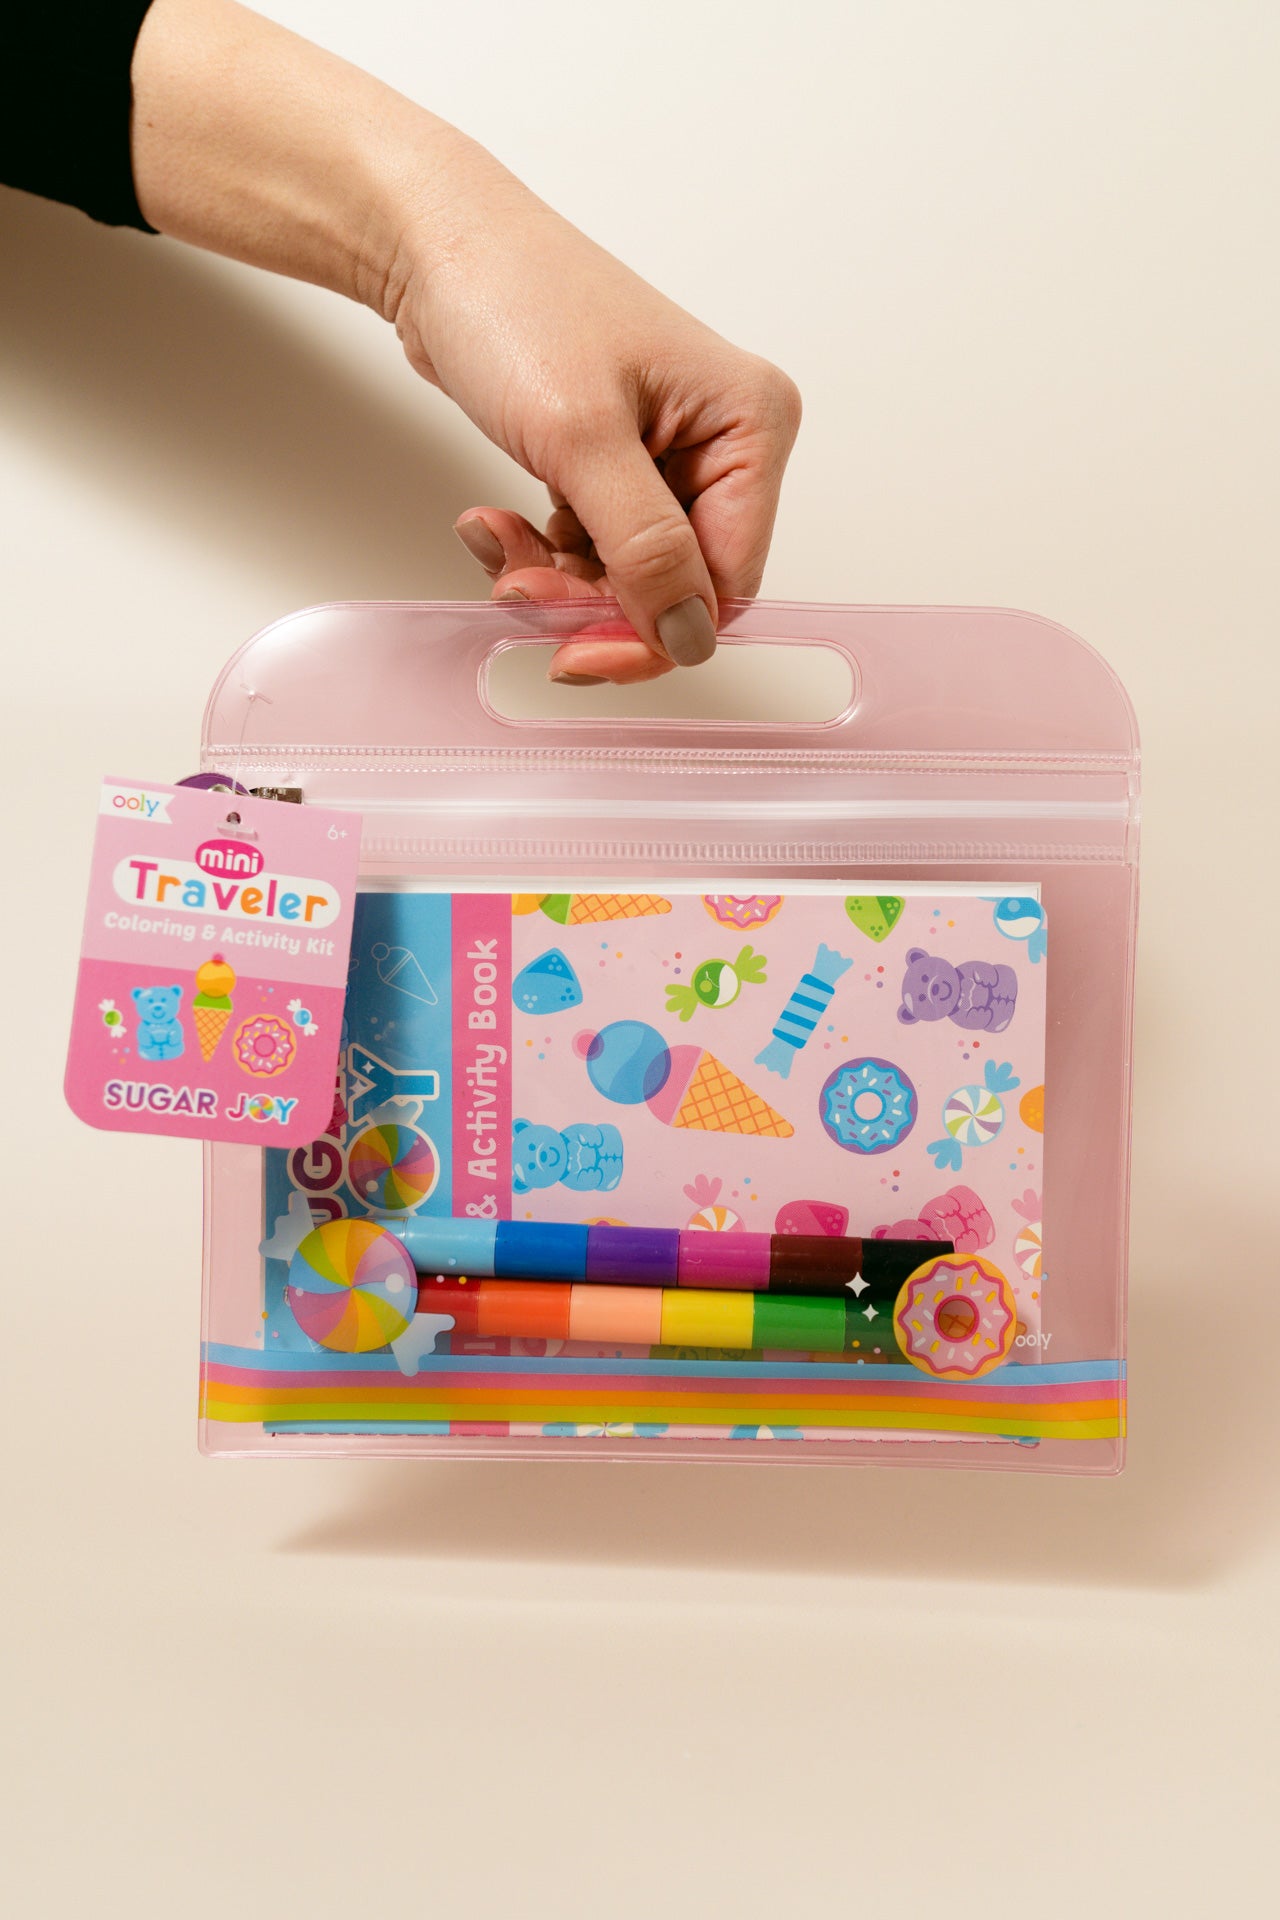 Ooly Mini Traveller Colouring and Activity Kit